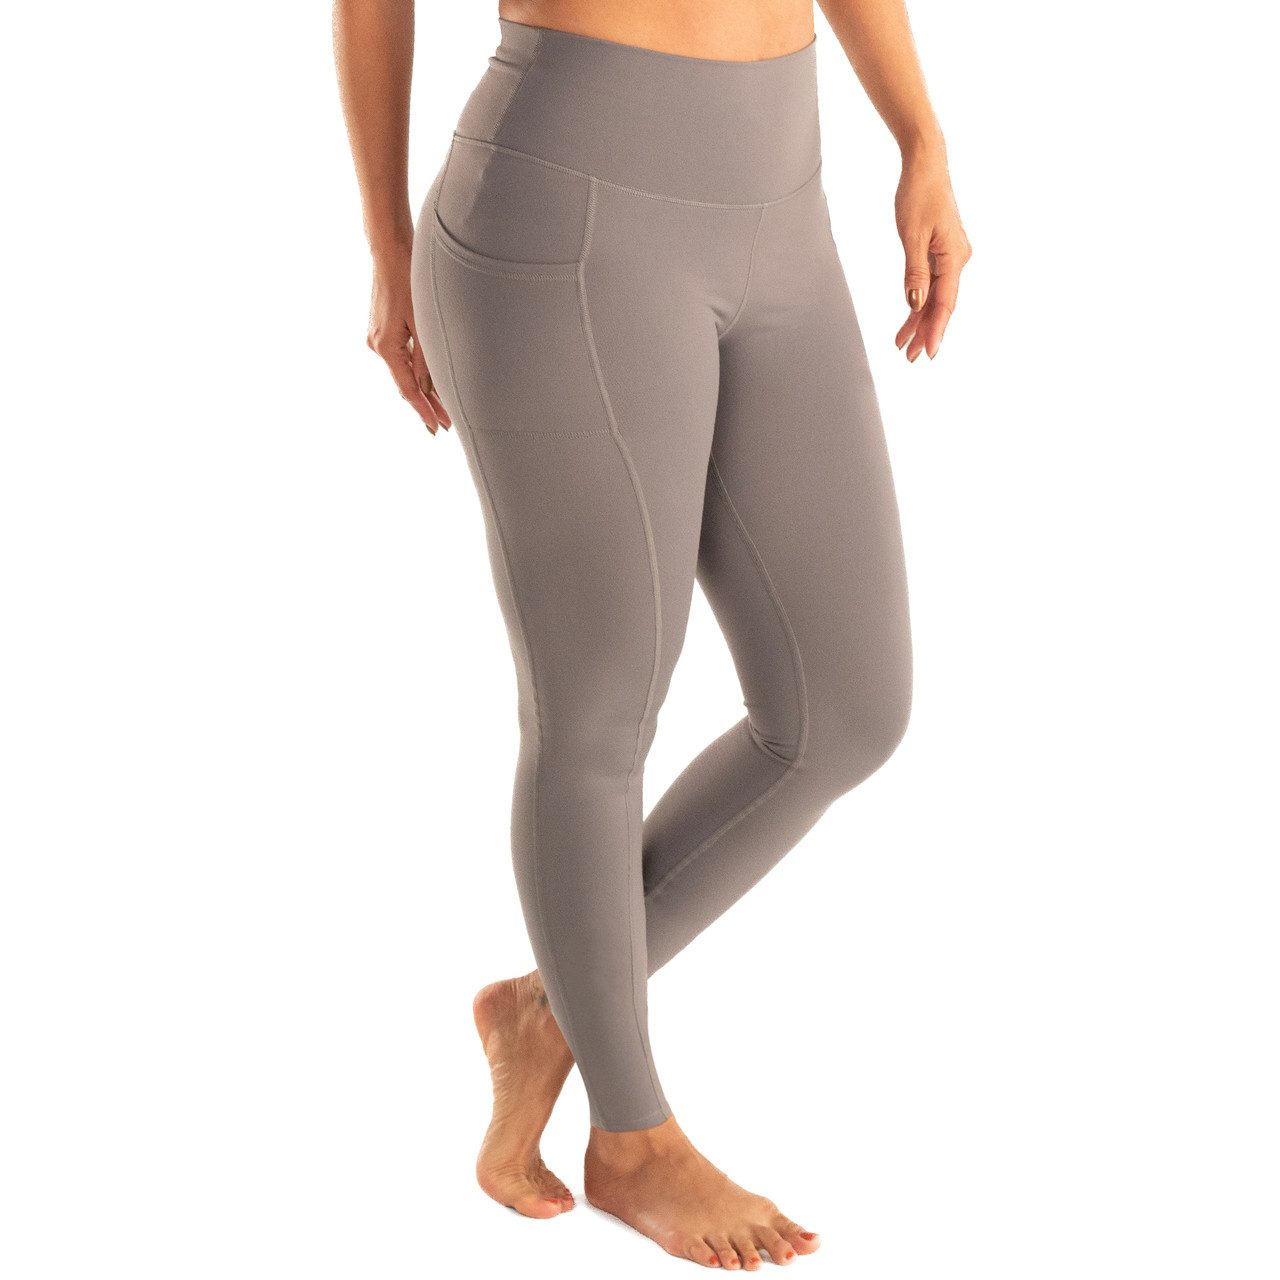 Leakproof Womens Leggings: Menstrual + Bladder Control Yoga Pants with  Pockets - Built-in Catch All Pads (22 Inseam)